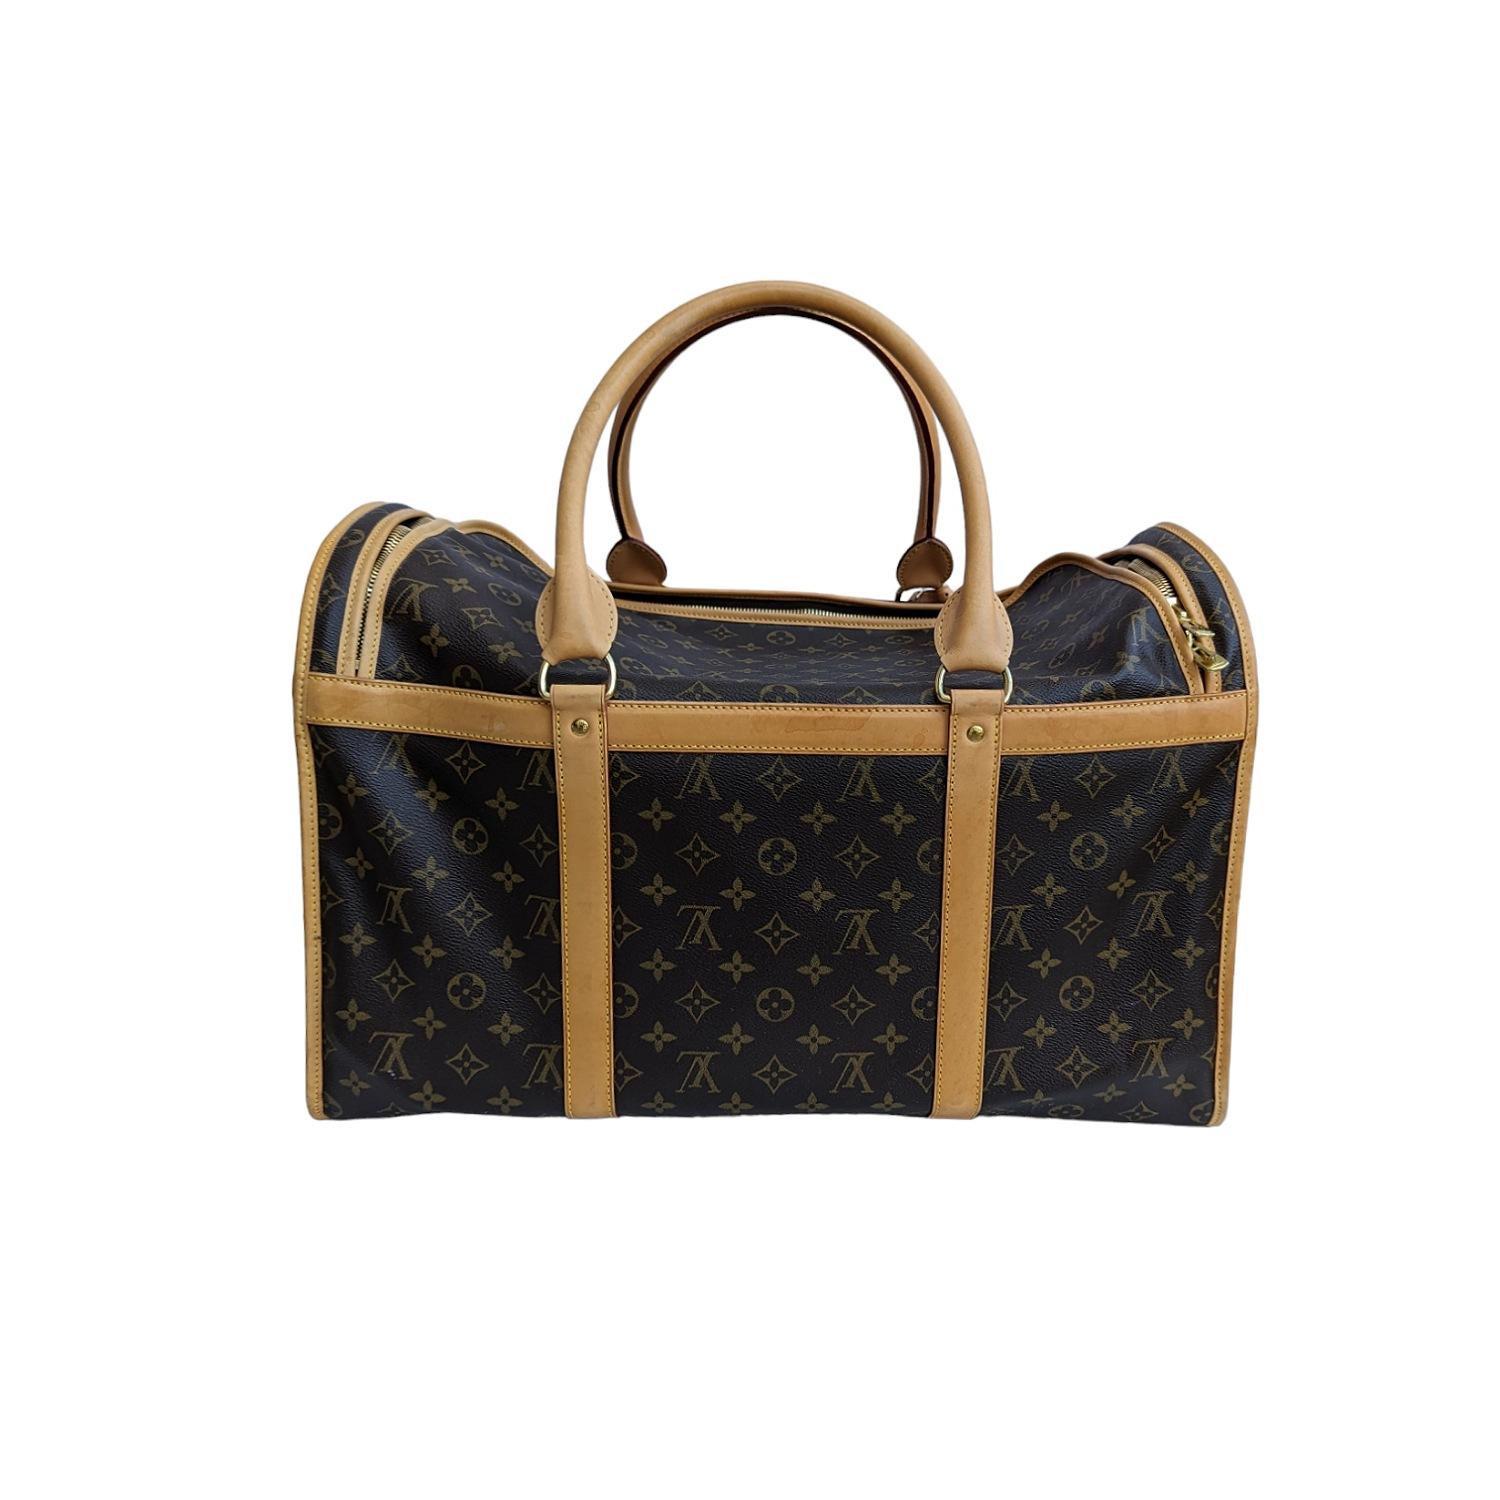 Travel in style with your posh pet with this Louis Vuitton Monogram Canvas Sac Chien 50 Dog Carrier. It features an accessible top with breathable metal side mesh with roll-up window option. It also has a double zip around closure and convenient